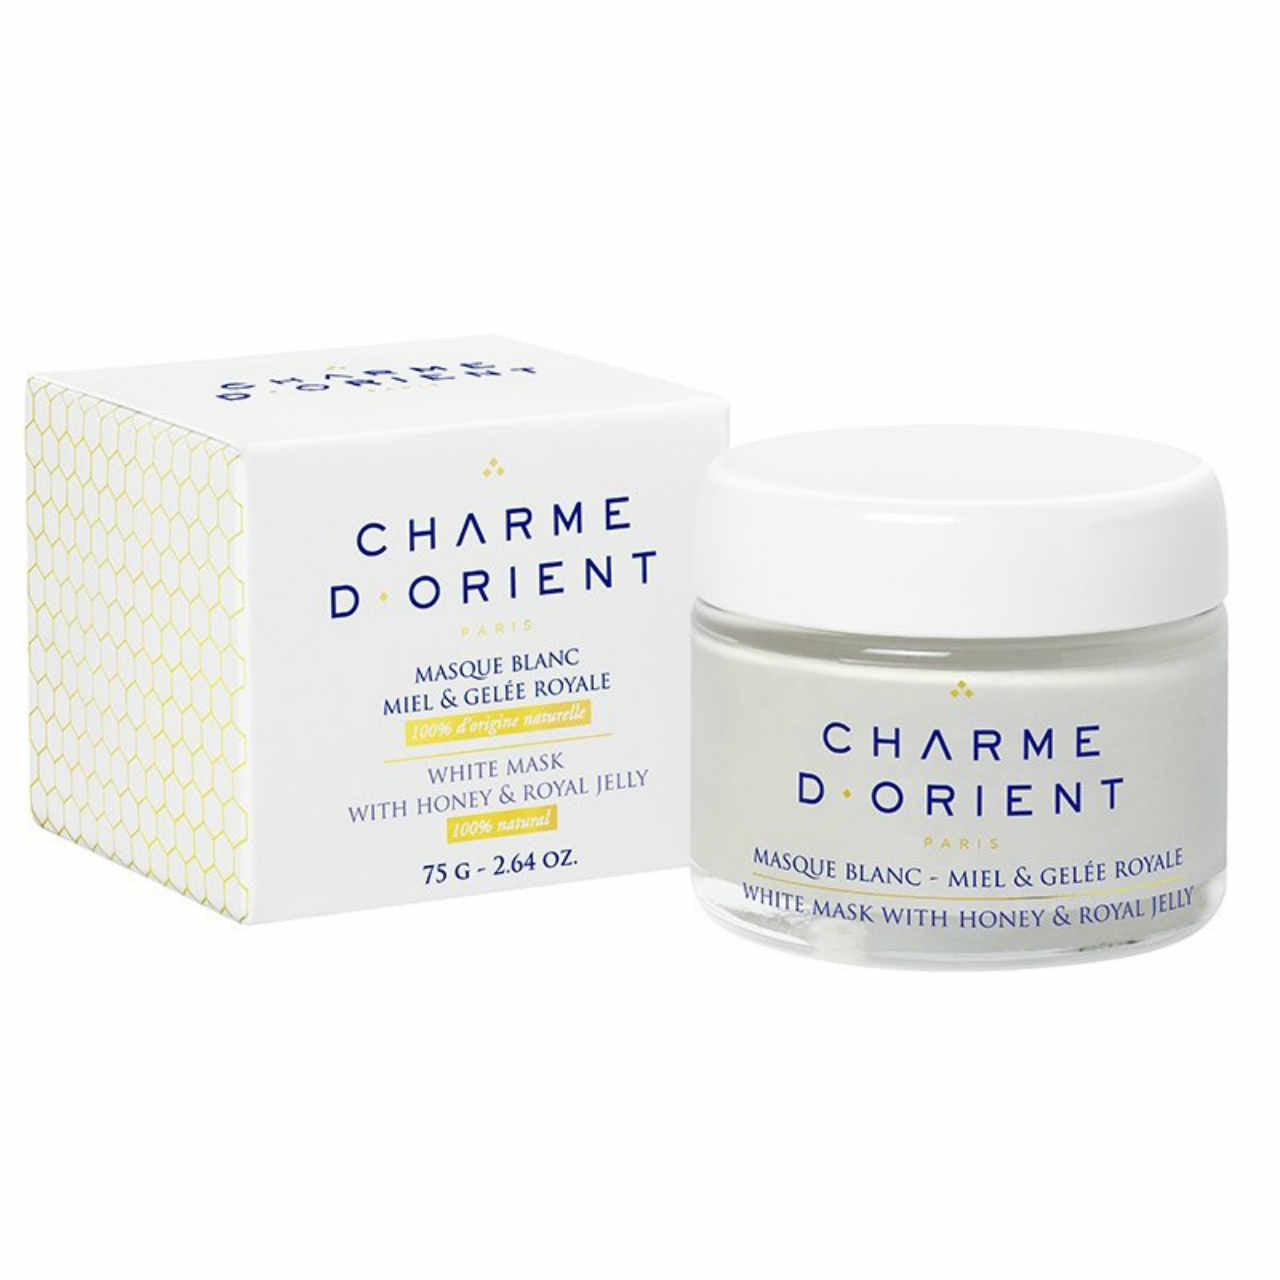 CHARME D'Orient White Mask with Honey and Royal Jelly